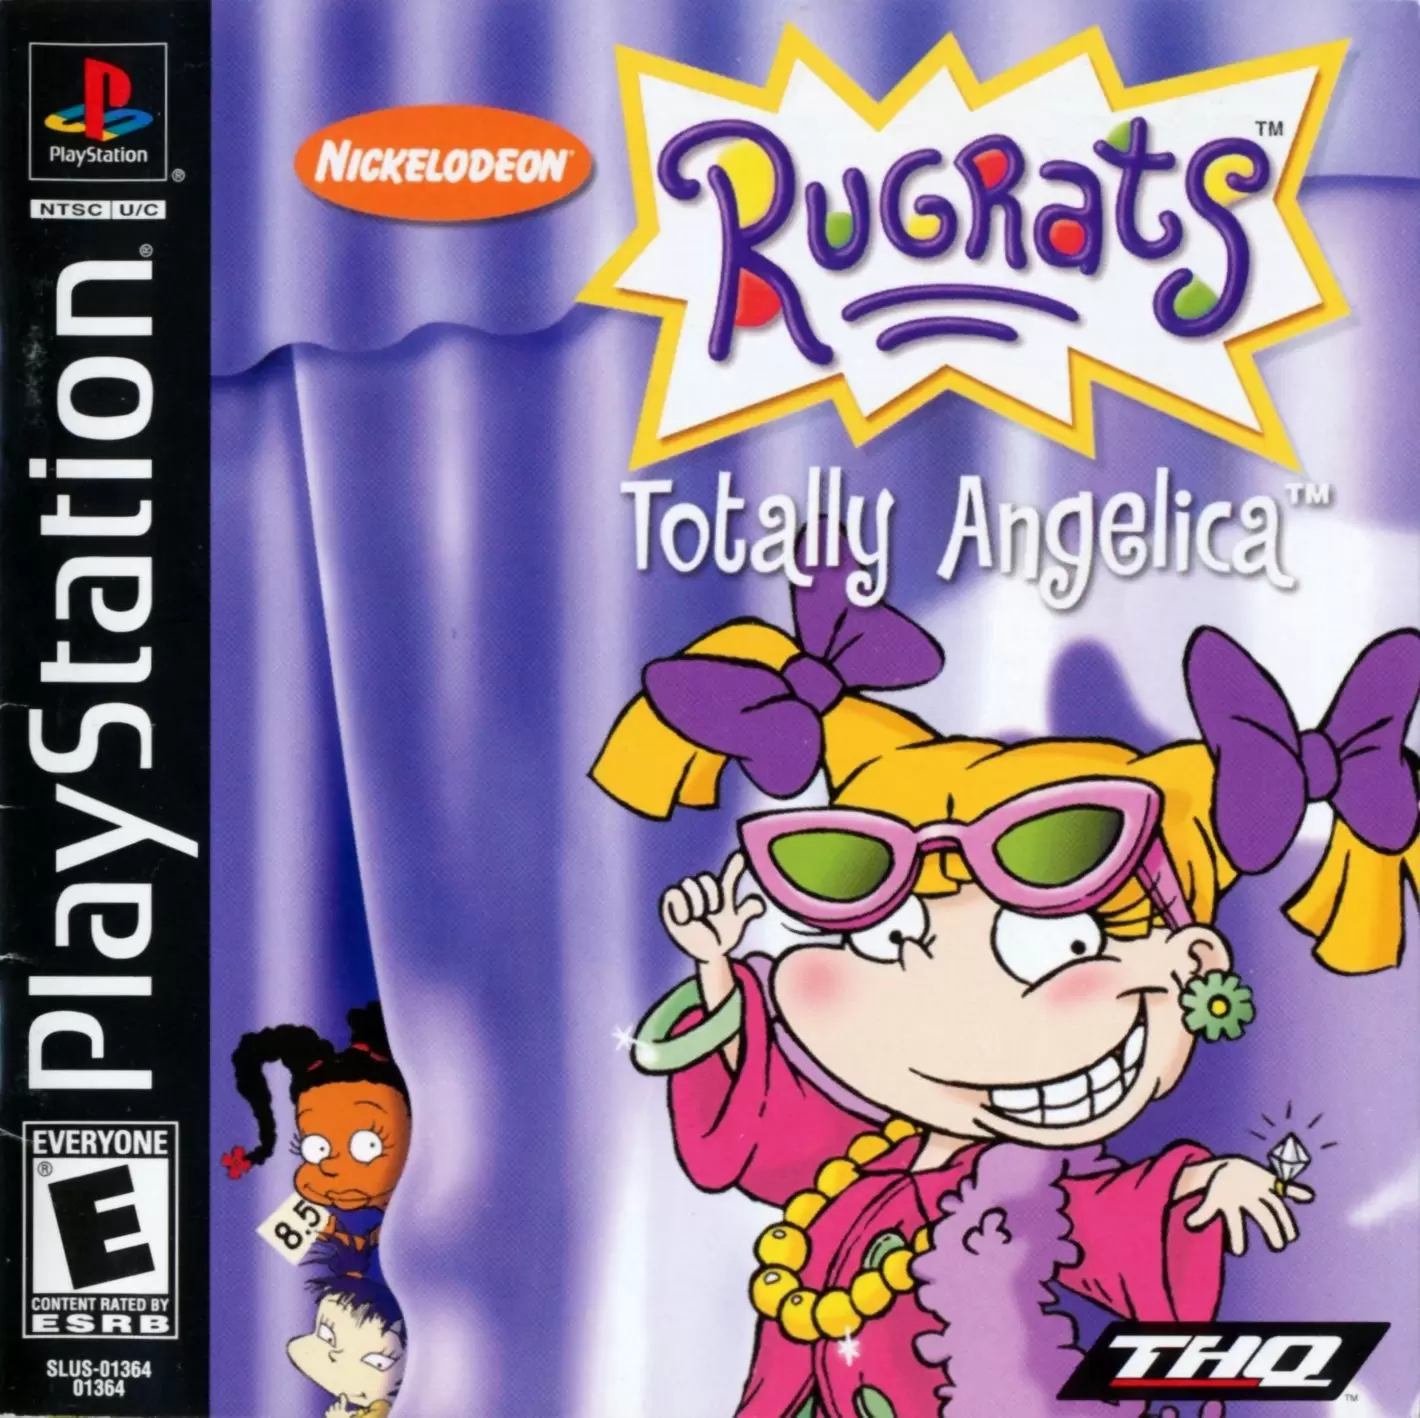 Playstation games - Rugrats: Totally Angelica